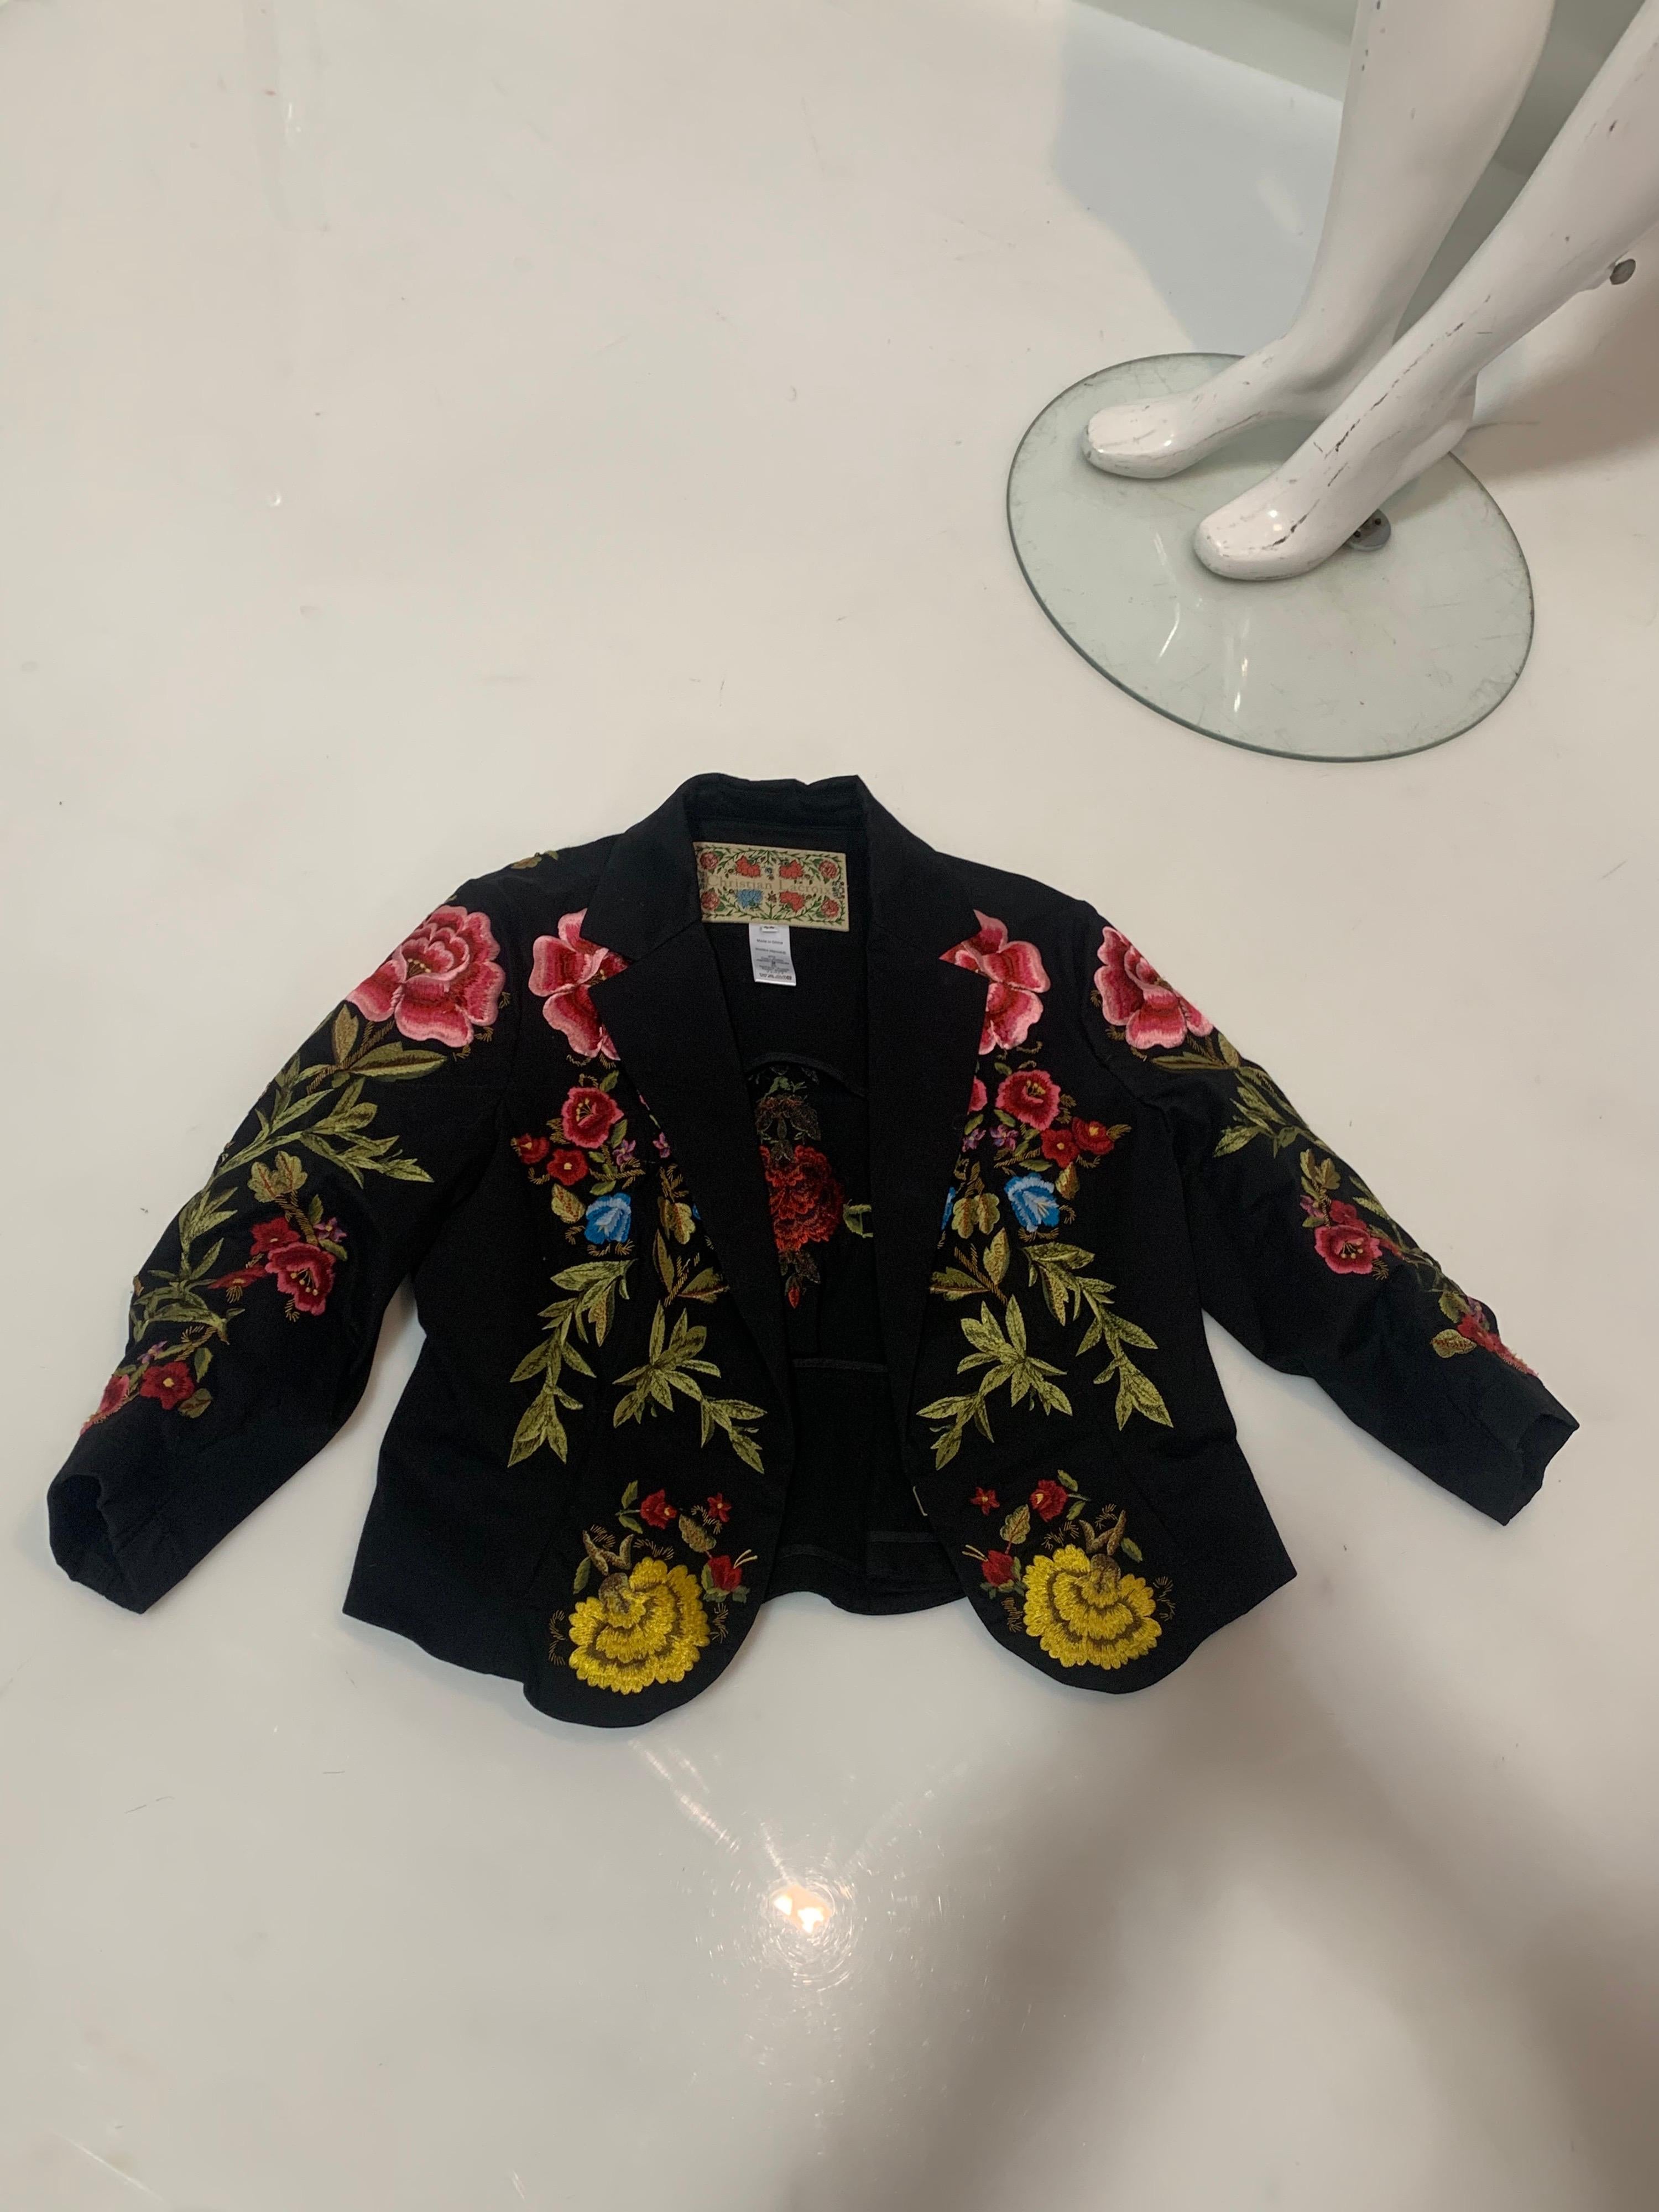 1990s Christian Lacroix Matador-Inspired Black Satin Jacket w/ Floral Embroidery 4